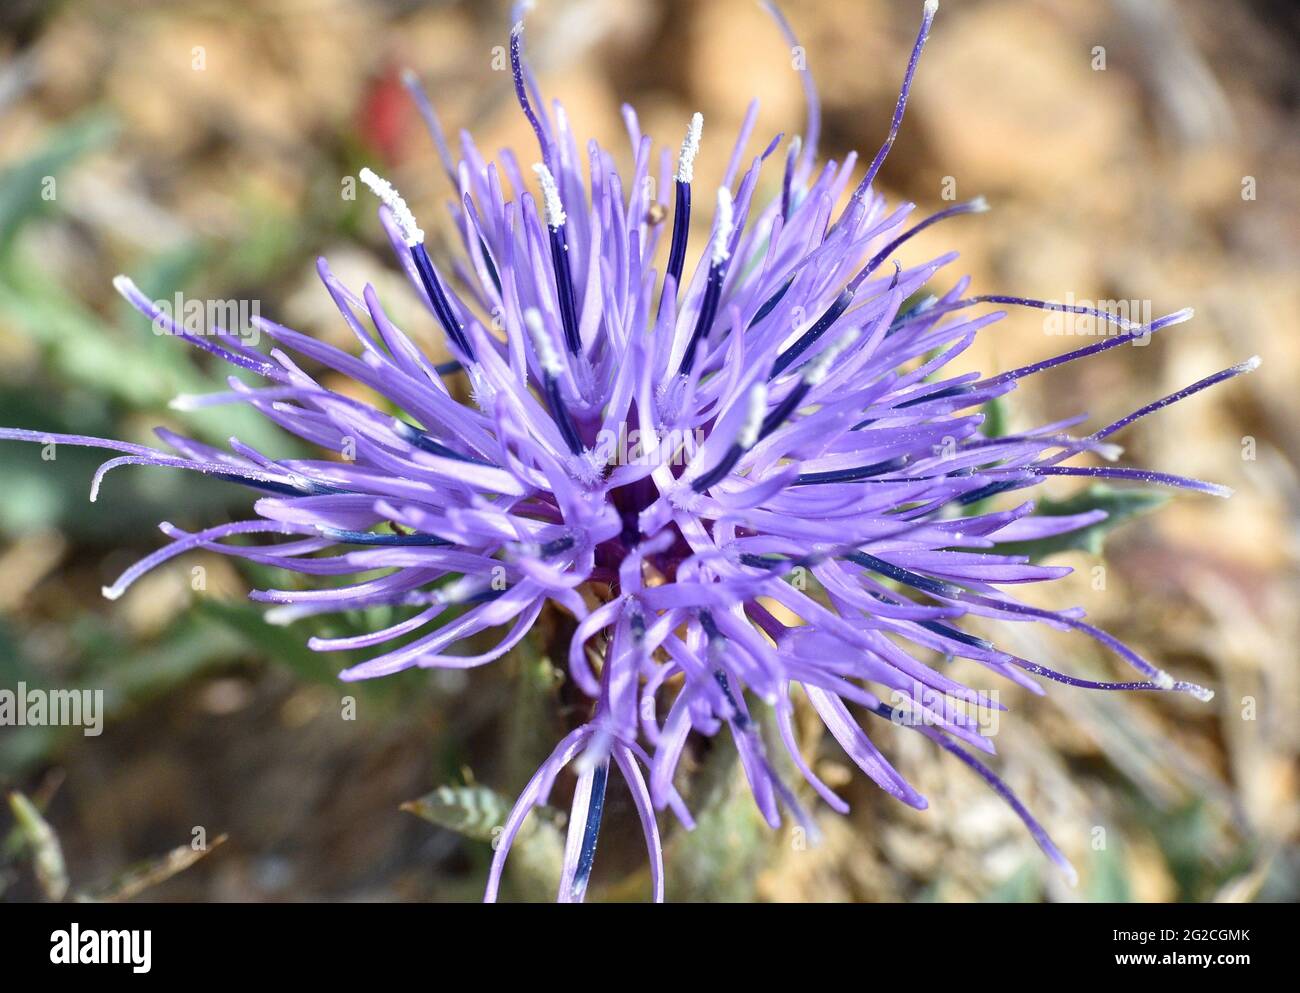 Flower of Carthamus Carduncellus or Carduncellus monspelliensium. Purple-blue flower located in the mountains on a sunny spring day. Stock Photo